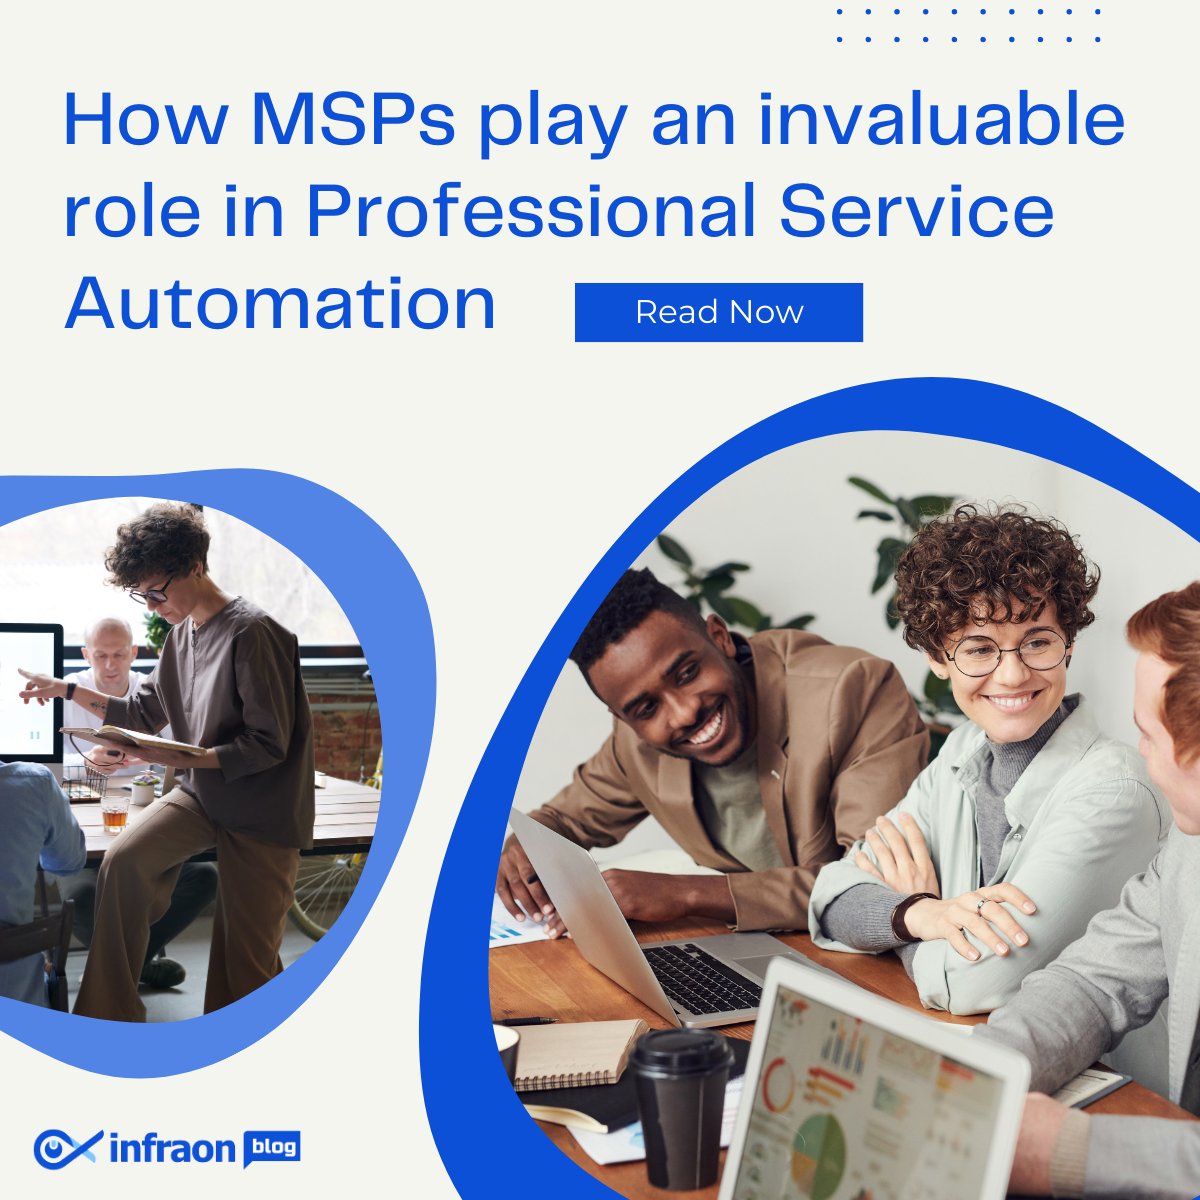 Managed Service Providers (MSPs) help skyrocket business efficiency by acting as the driving force of Professional Service Automation (PSA) solutions. Join us in this insightful learning journey! Read the blog here...bit.ly/48ZBHtd #saasproduct #saas #infraon #ITSM